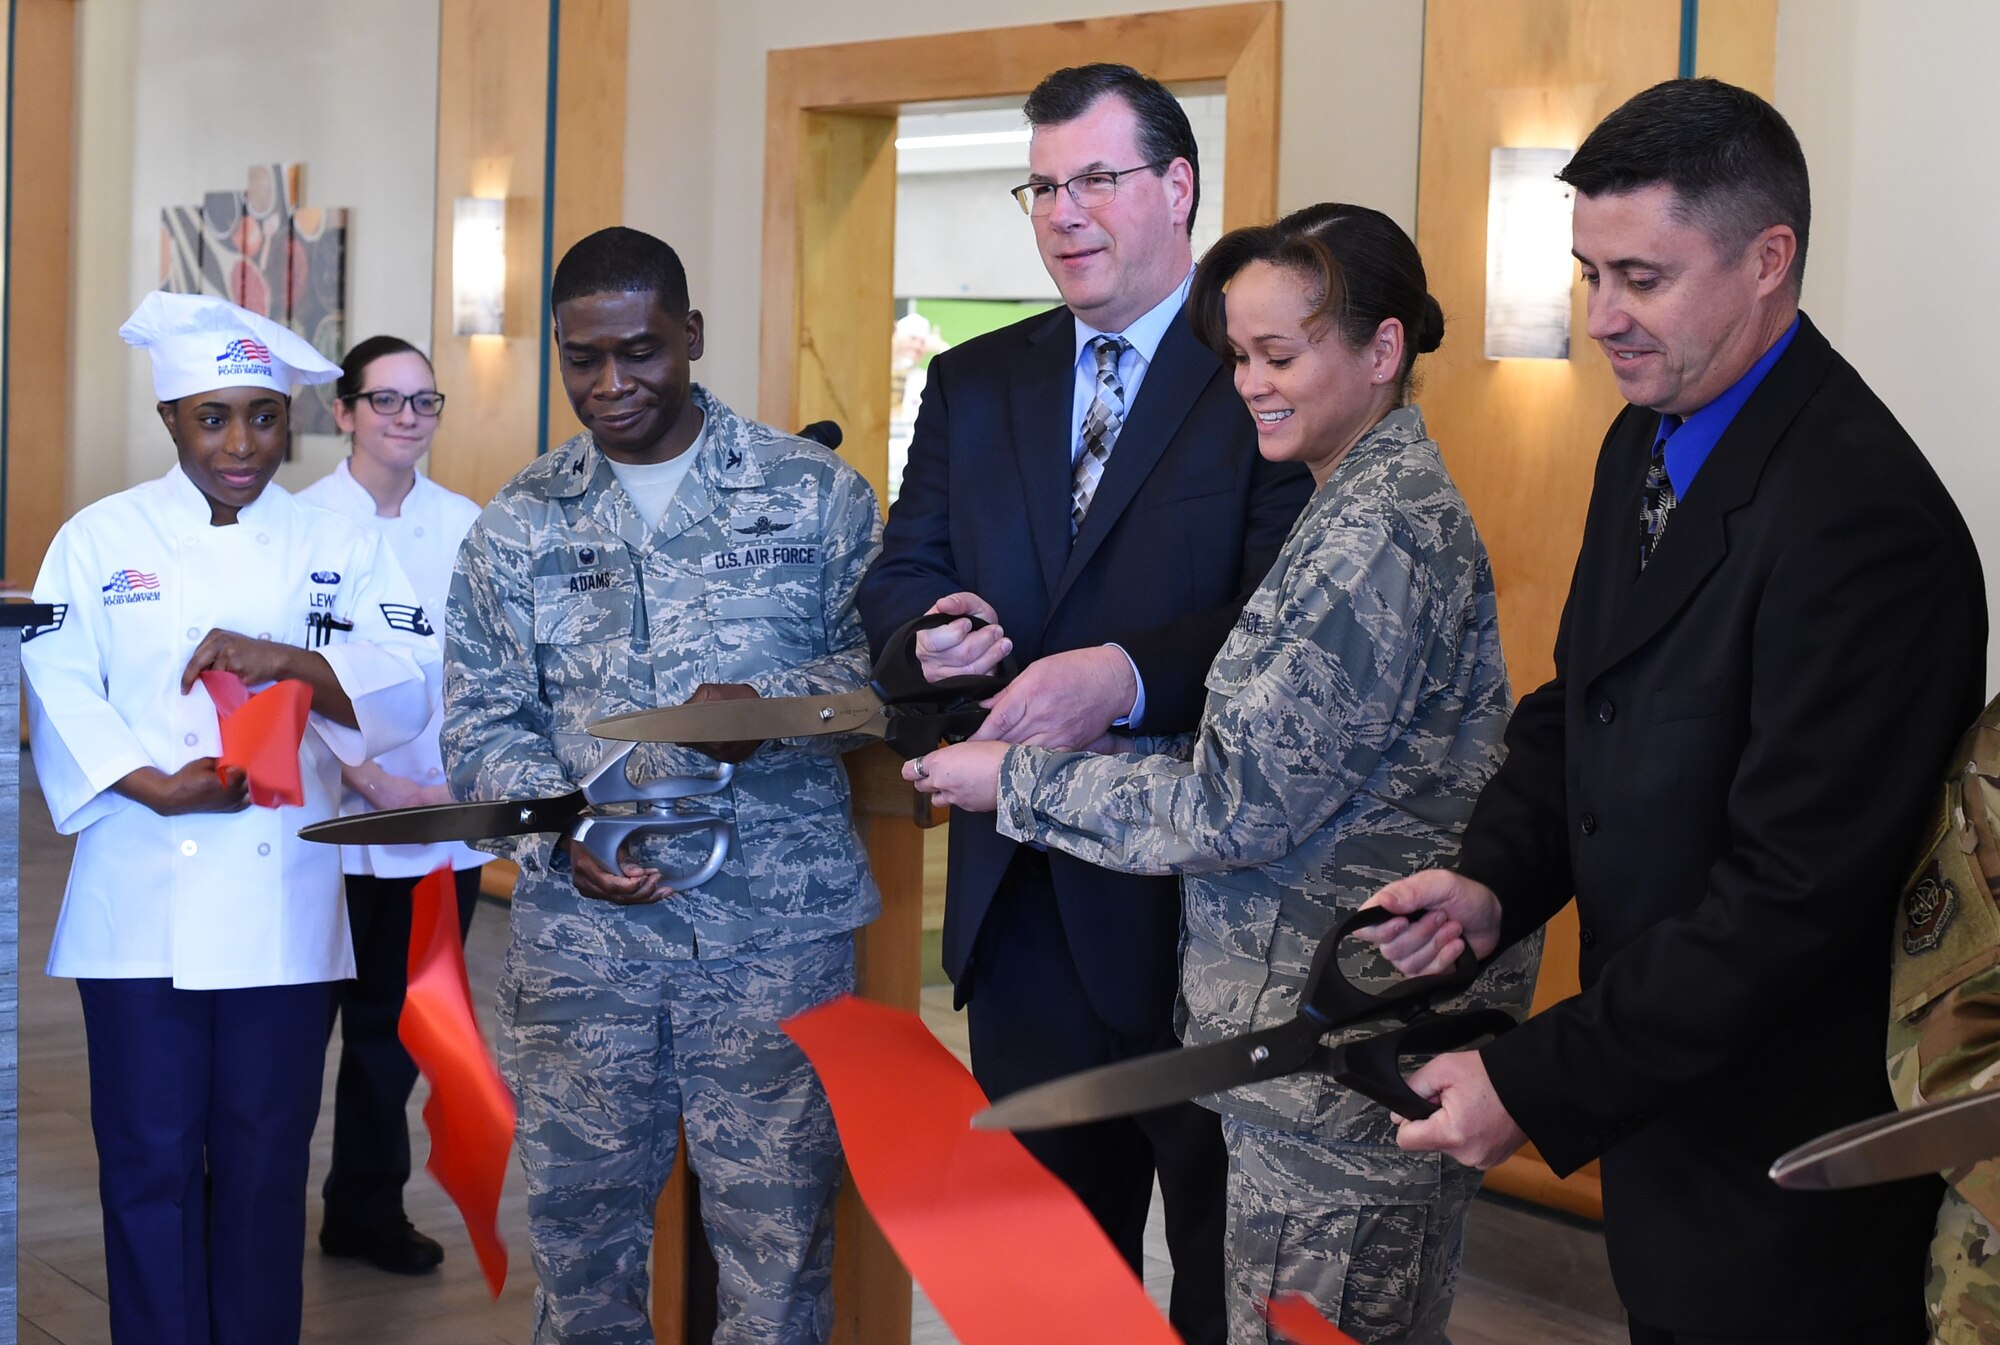 Colonel Terrence Adams, left, 628th Air Base Wing commander, joins Lt. Col. Jacqueline Sukhlall, second from right, Air Force Services Activity Operations Directorate deputy director, along with civilian contractors to mark the opening of the Gaylor Dining Facility Feb. 1, 2019, at Joint Base Charleston, S.C.